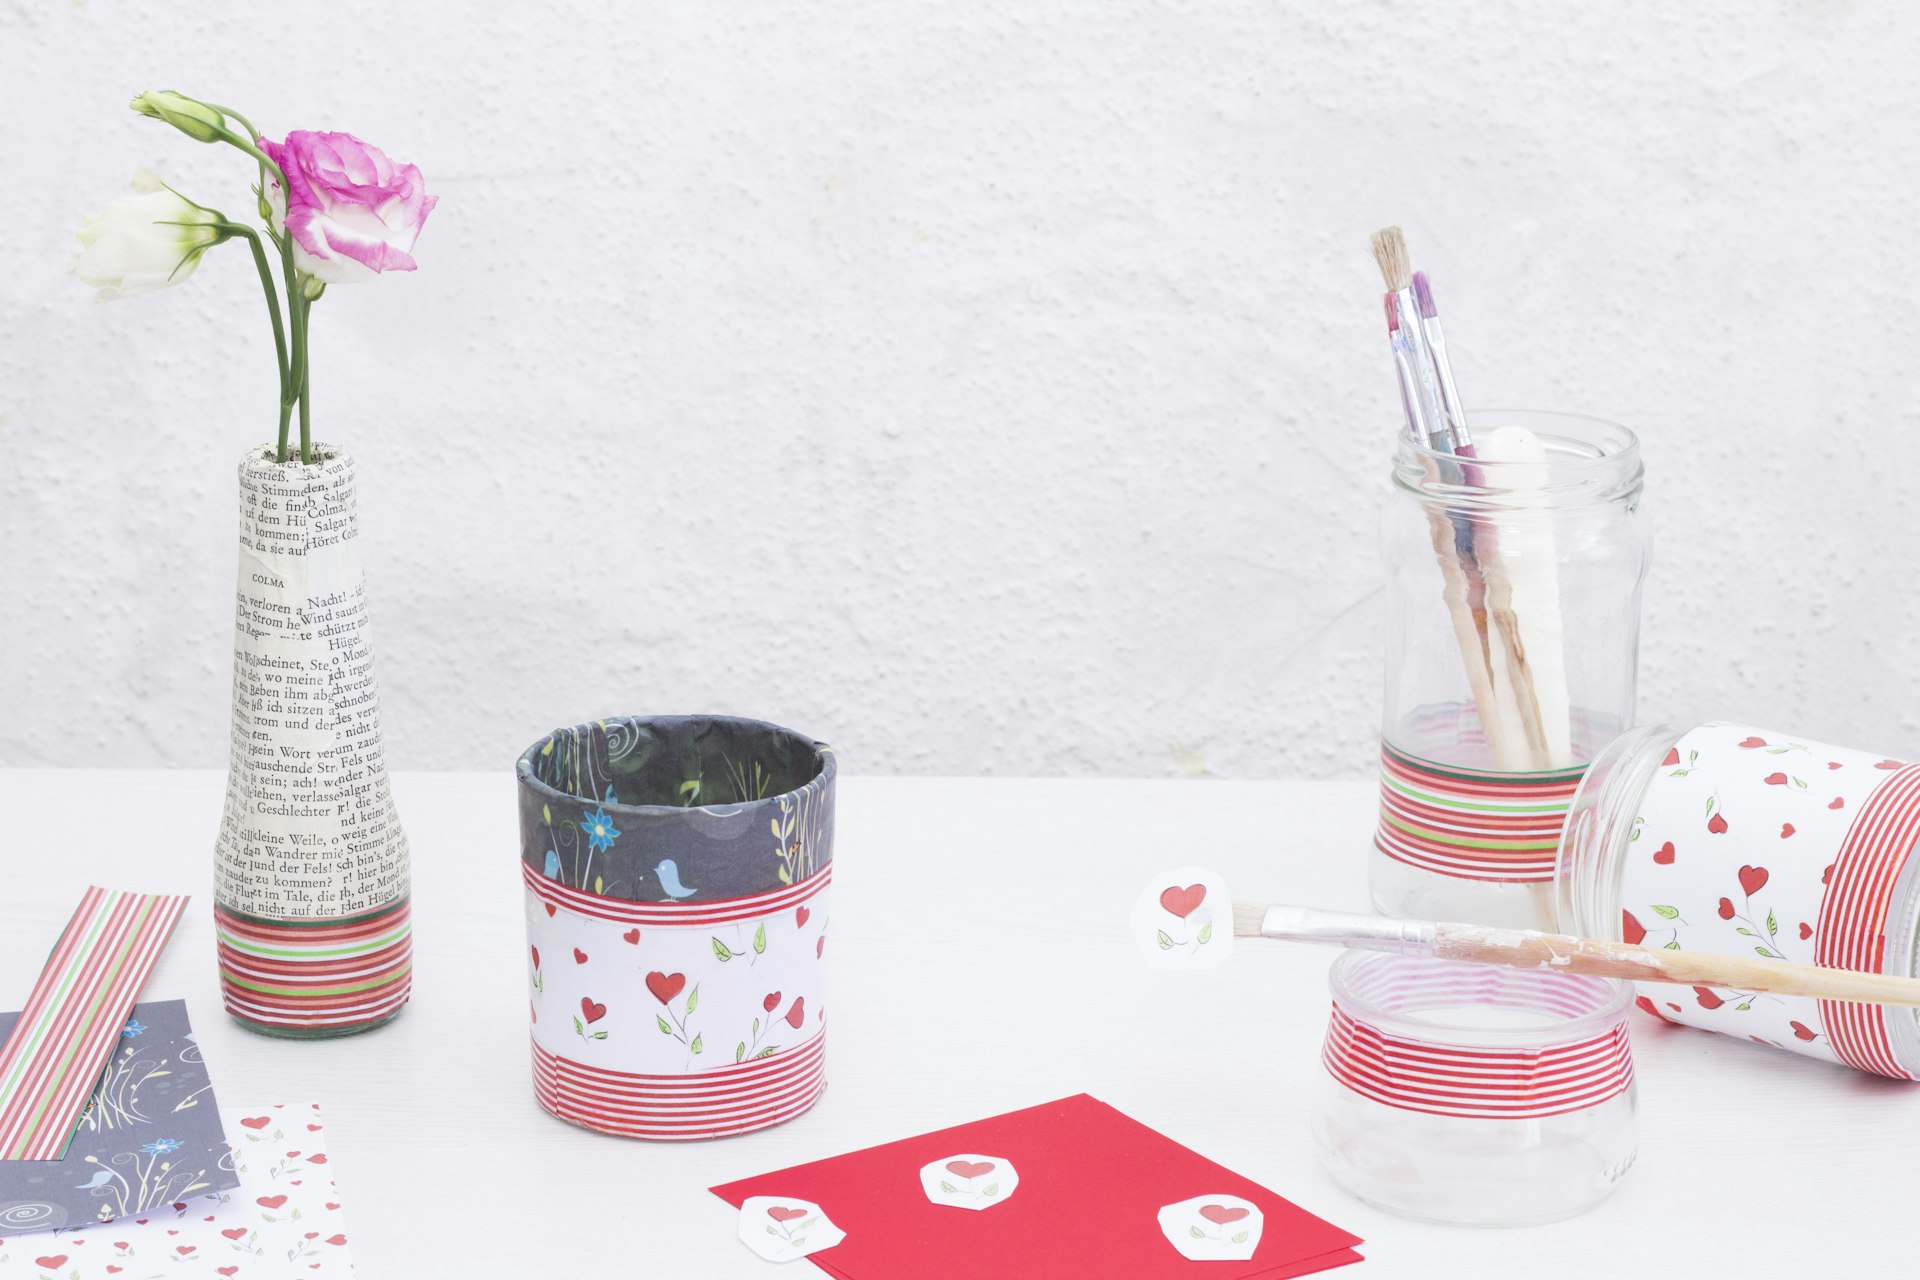 Decorating glasses with decoupage